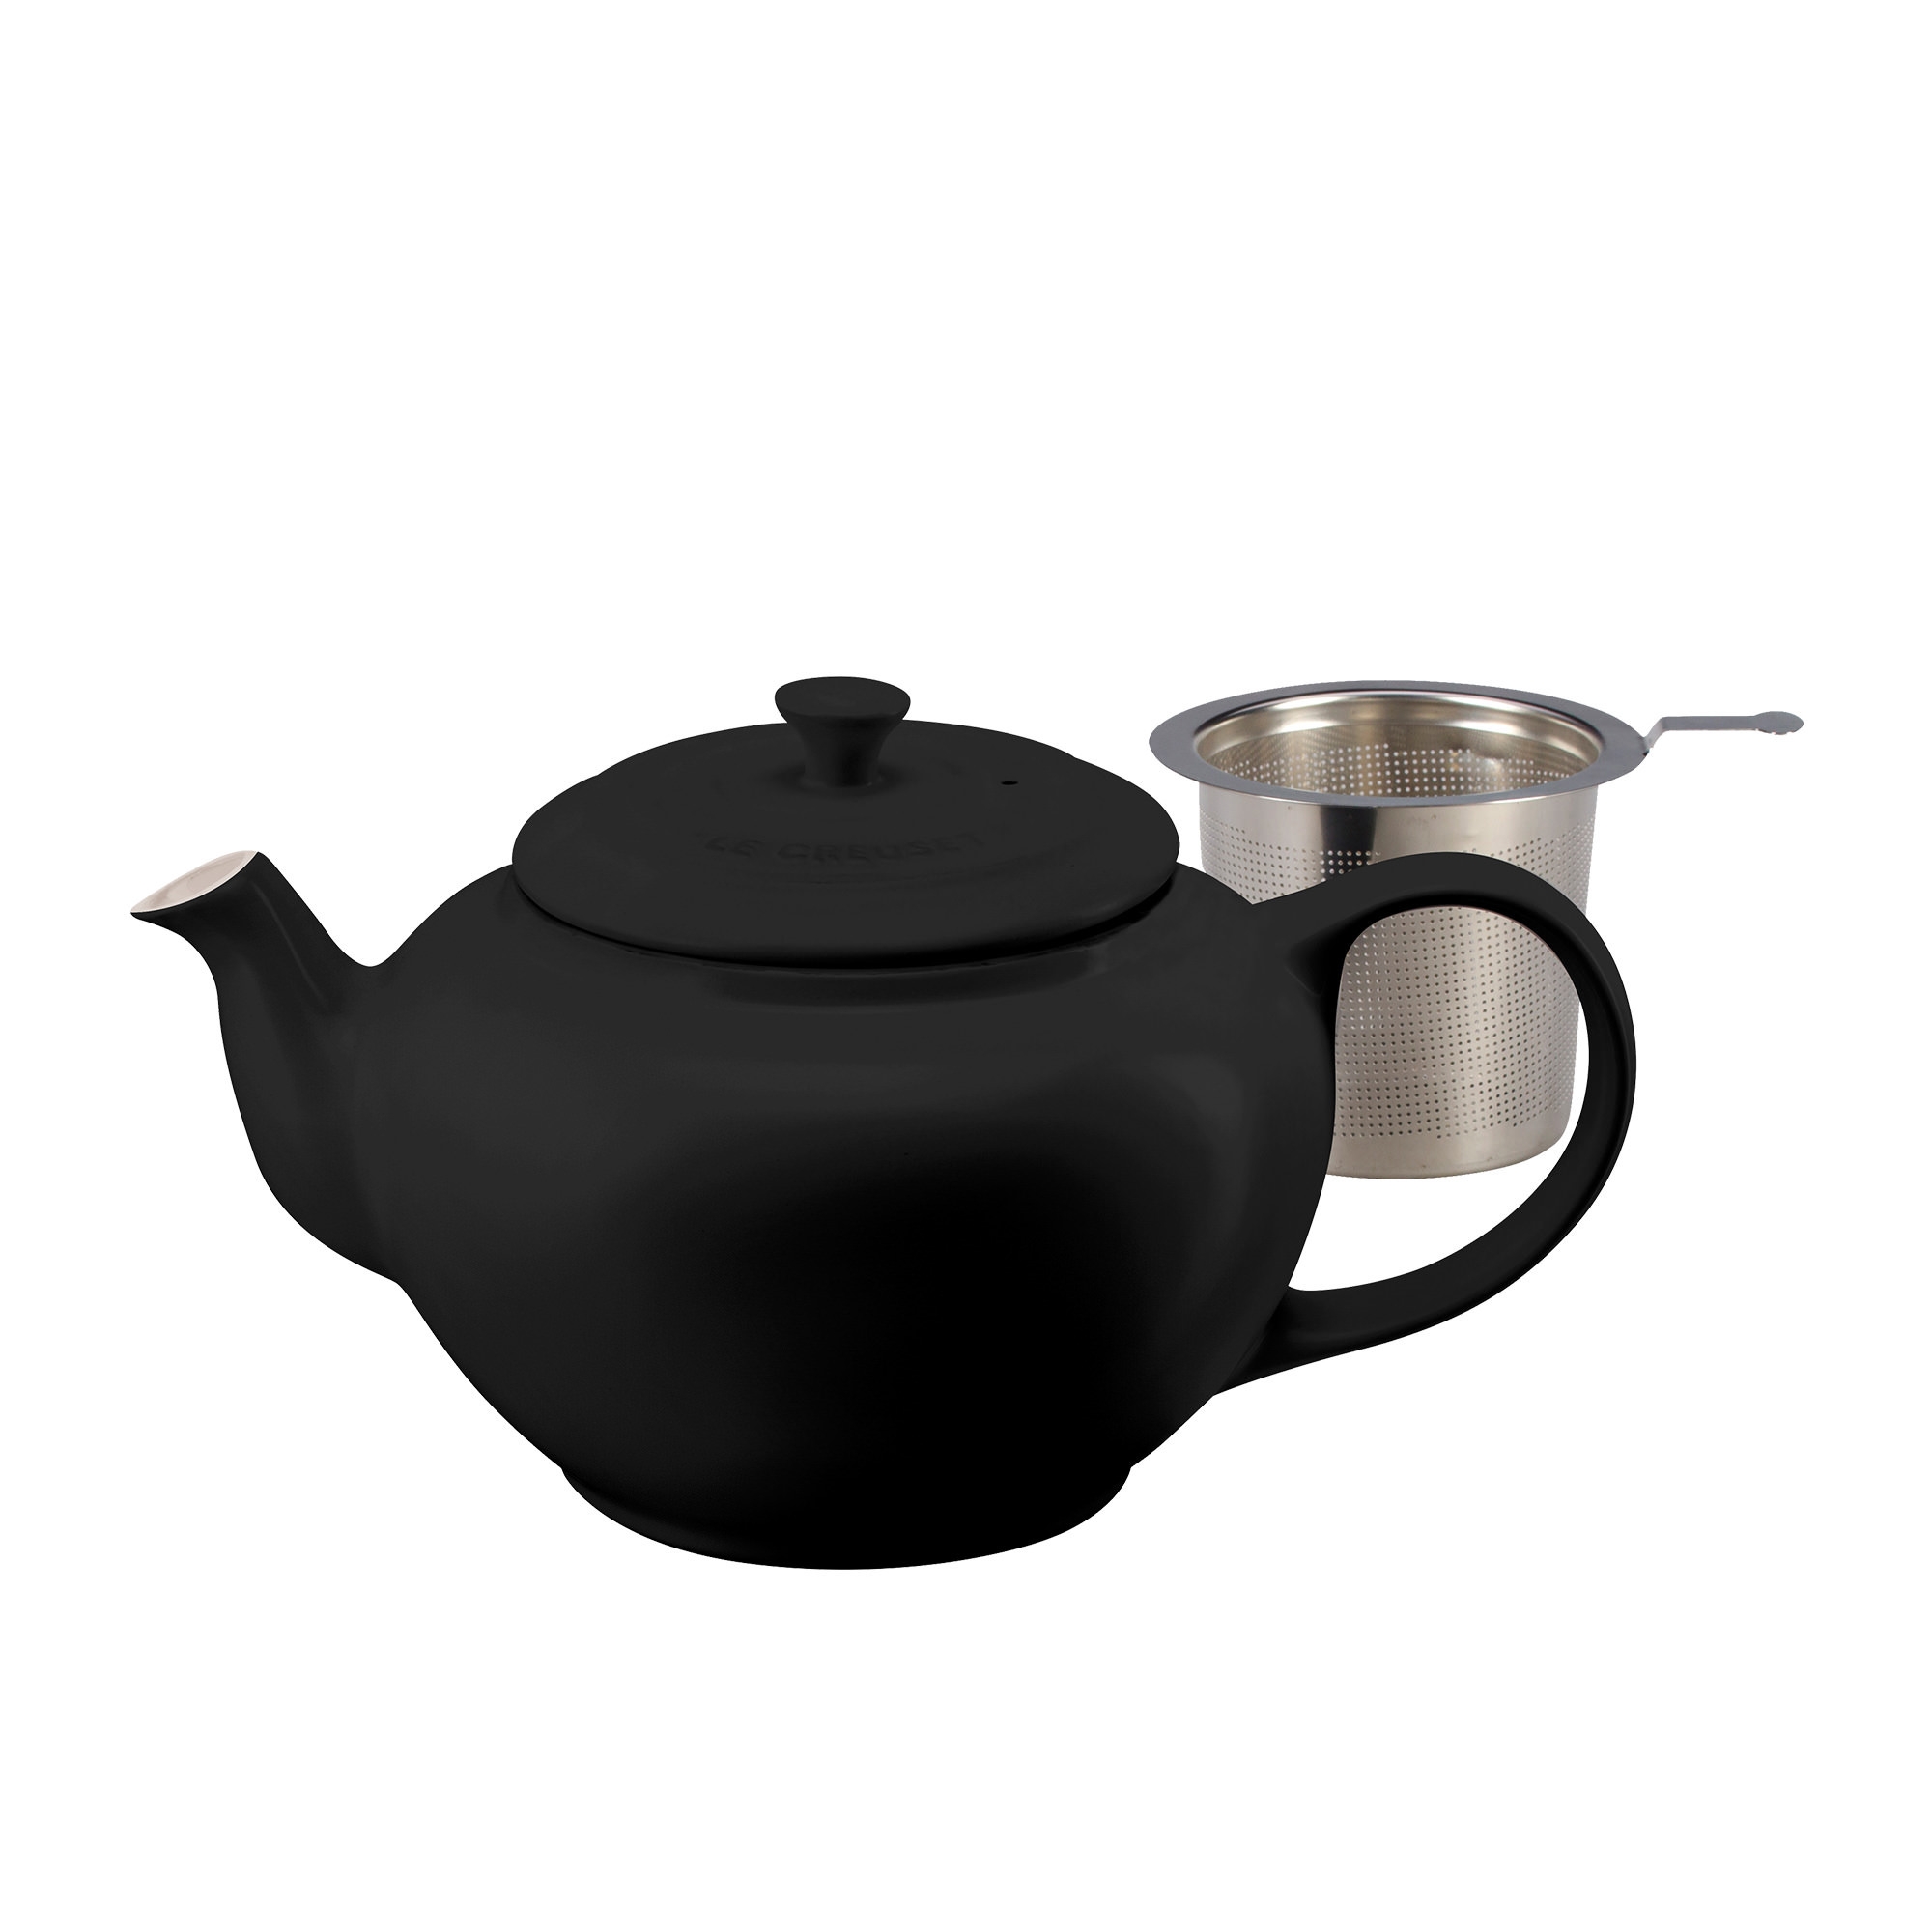 Le Creuset Classic Teapot with Stainless Steel Infuser 1.3L Satin Black Image 1